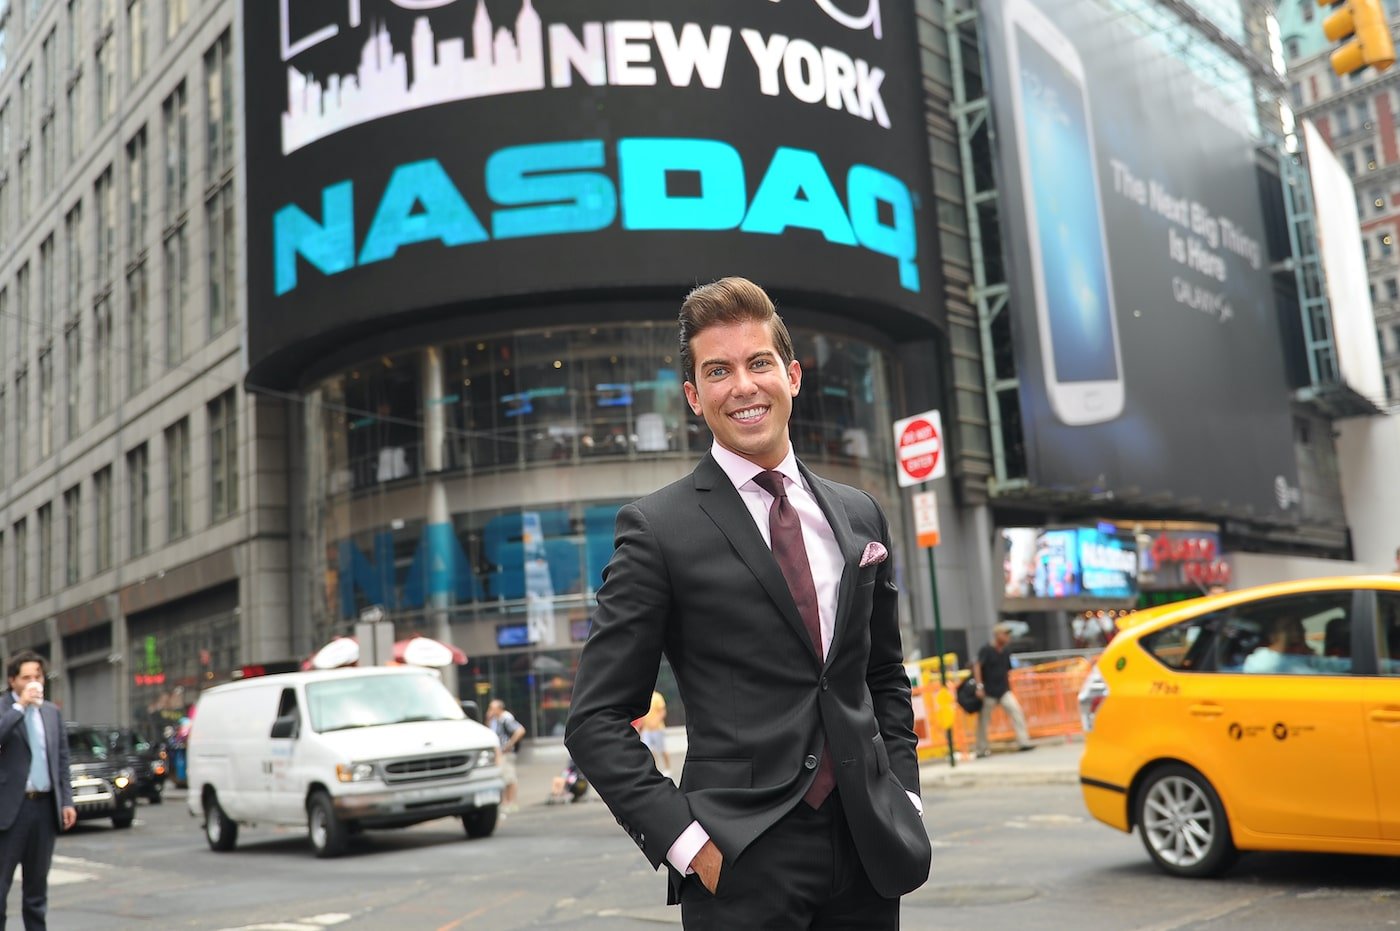 Luis D. Ortiz stands in the middle of NYC traffic with hands in pockets